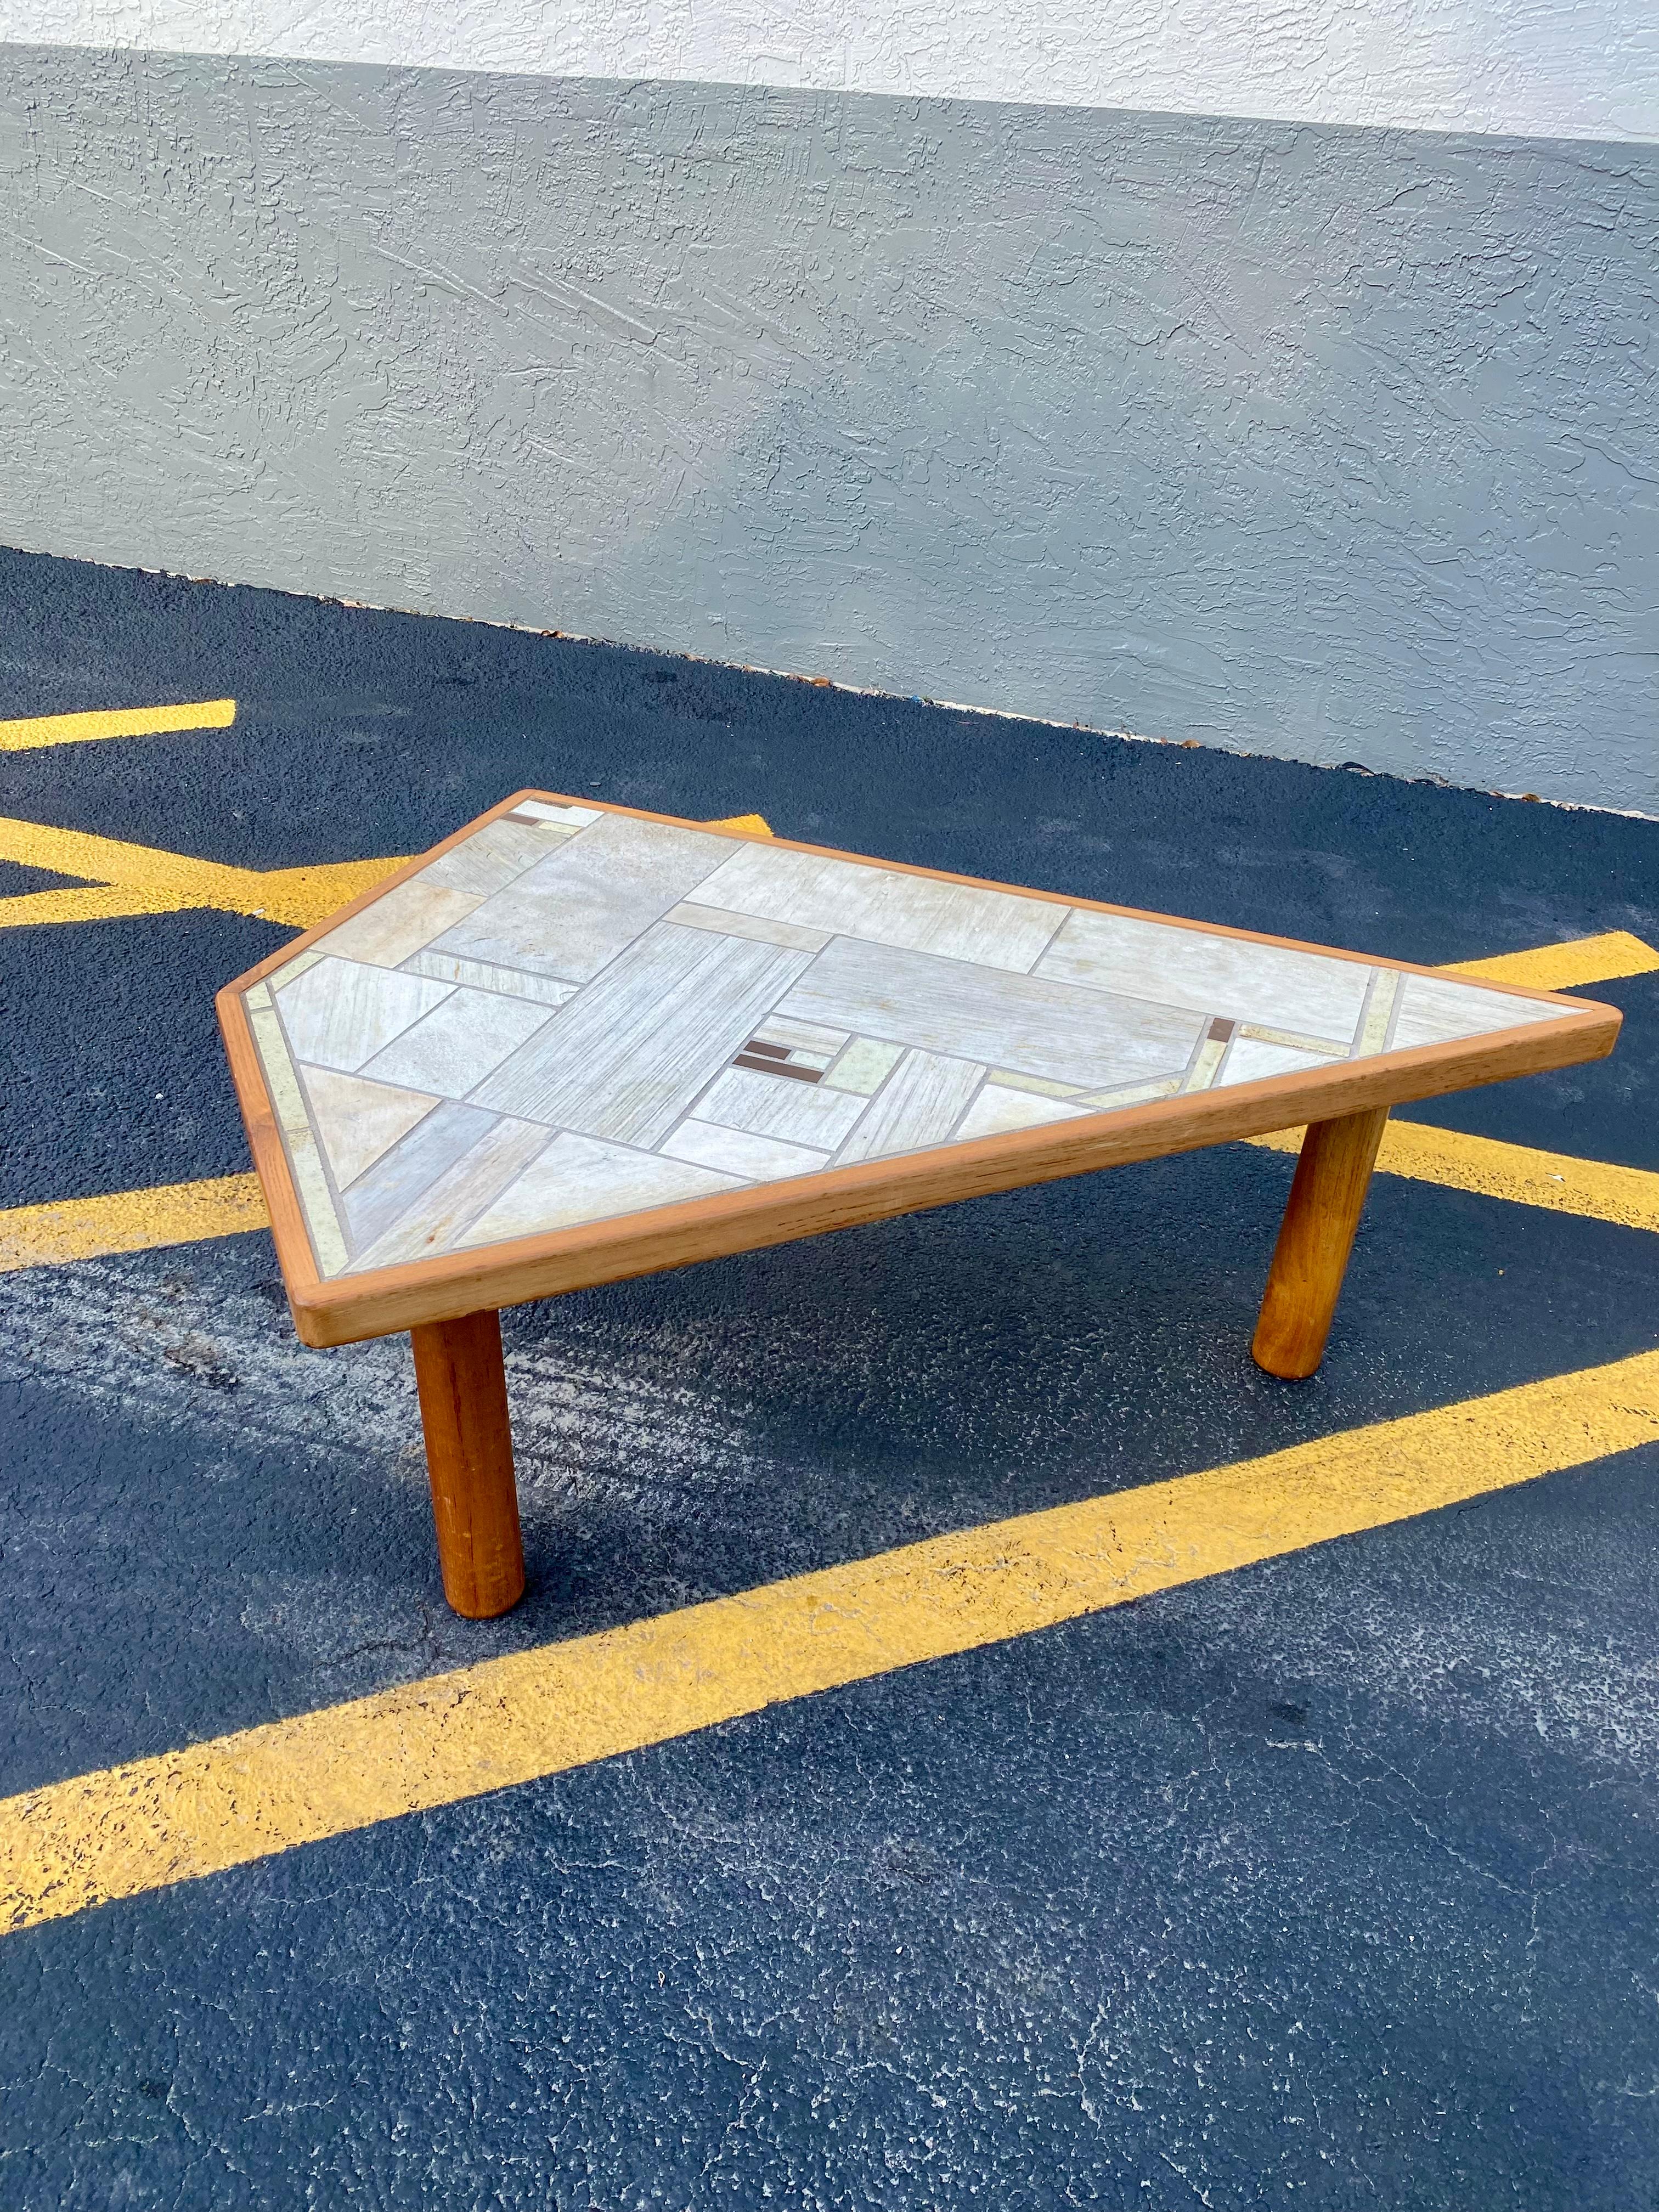 1970s Asymmetrical Travertine Ceramic Tiles Coffee Table Sallingboe Jelling In Good Condition For Sale In Fort Lauderdale, FL